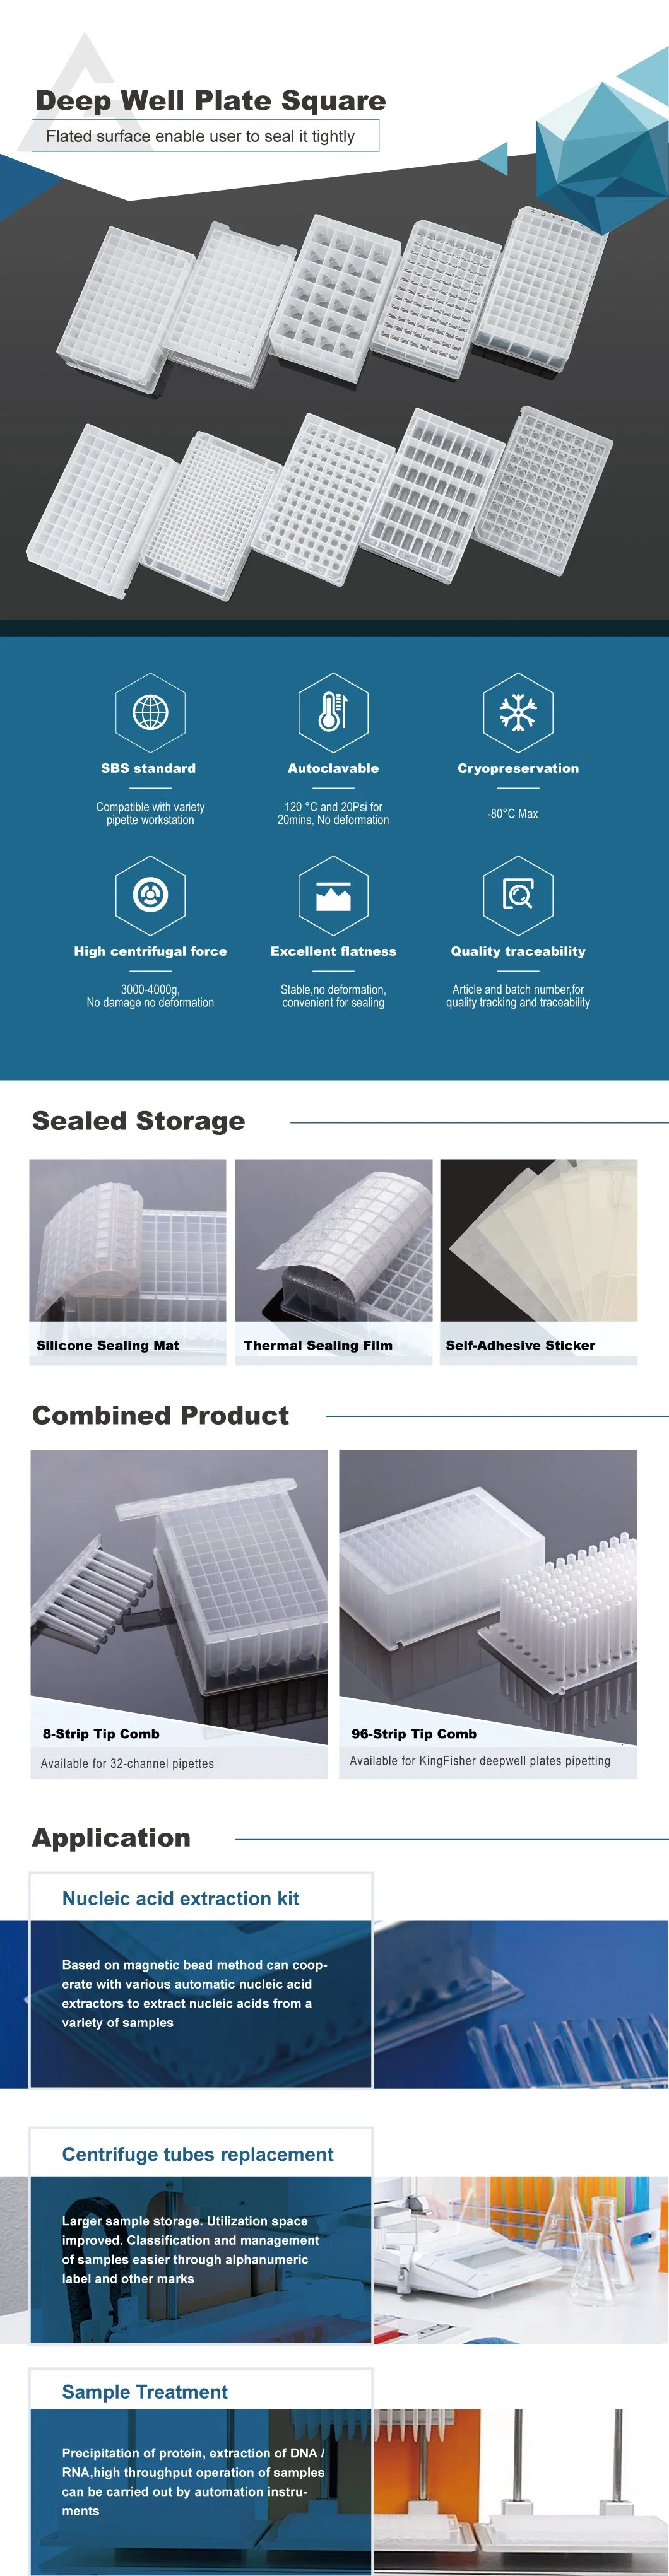 0.5ml 96 Well Microplate Square Deep Well Plate for Kingfisher (sterile and low retention)